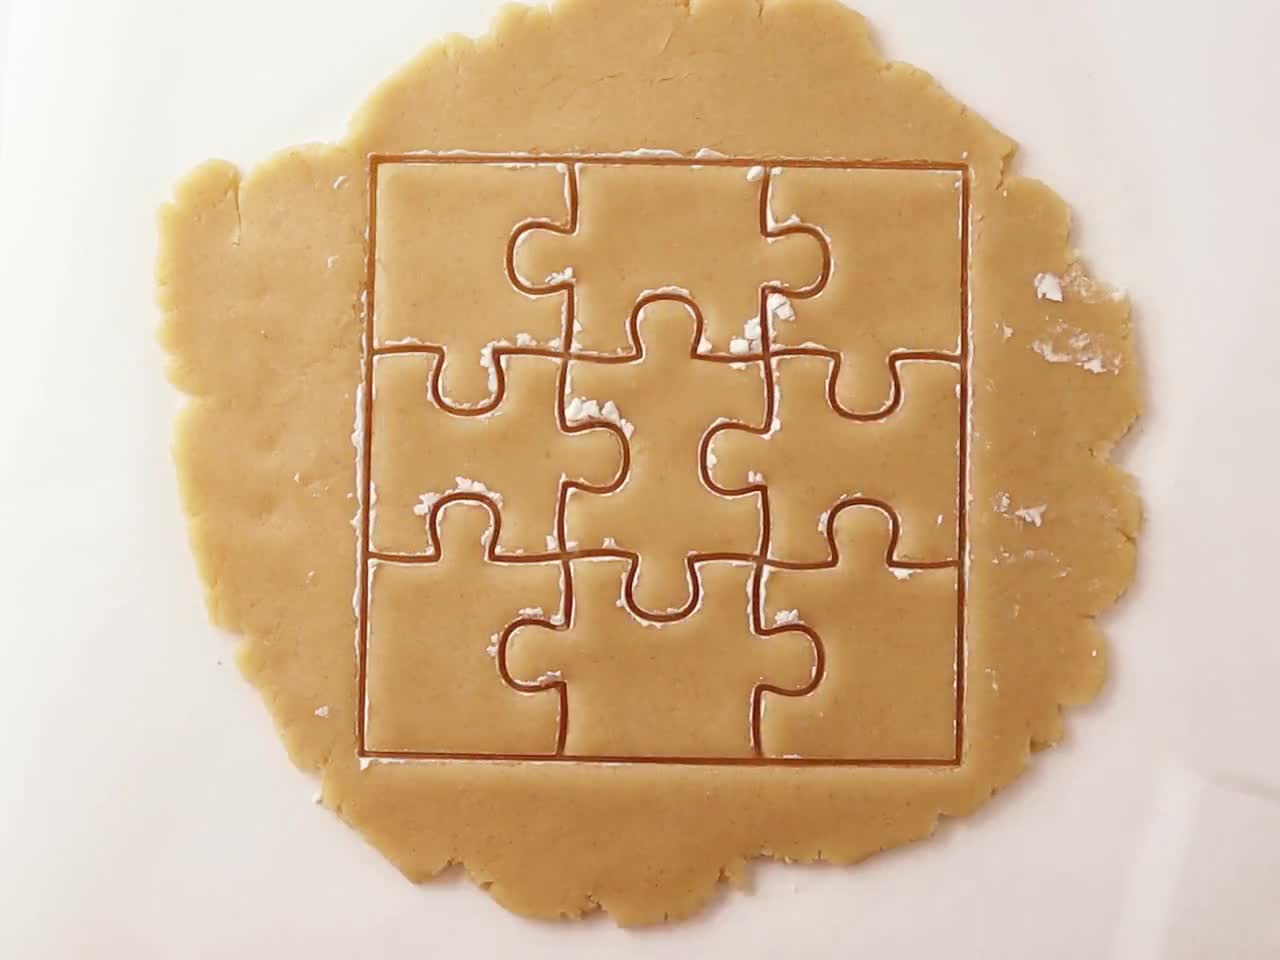 Puzzle Cookie Cutter Jigsaw Cookie Cutter Puzzle Piece Cookies Square  Cookie Cutter Jigsaw Puzzle Cookies Board Game Gift Jigsaw Gift -   Australia